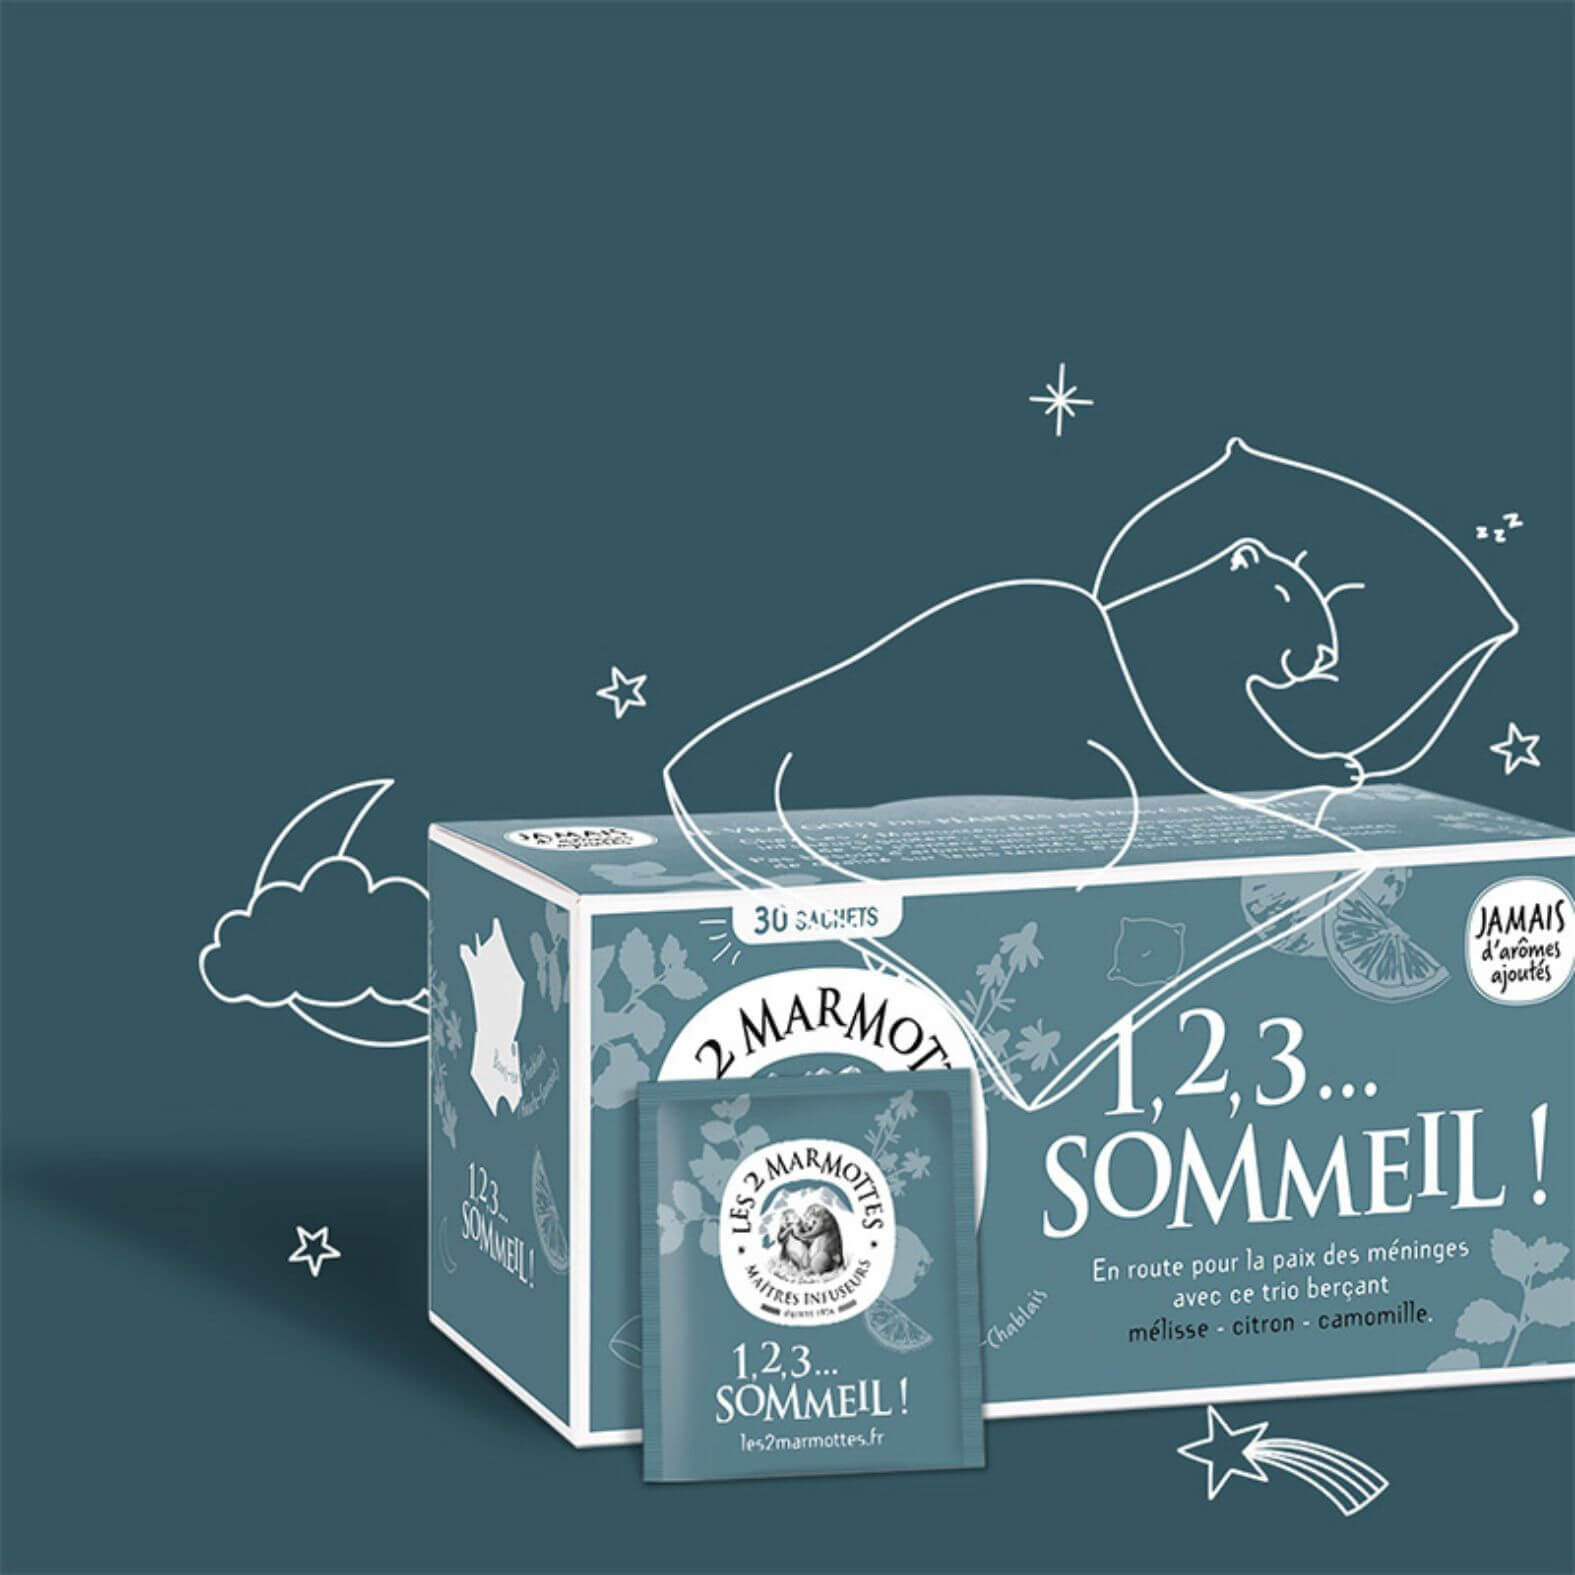 Infusion 1, 2, 3… Sommeil ! - Les 2 Marmottes